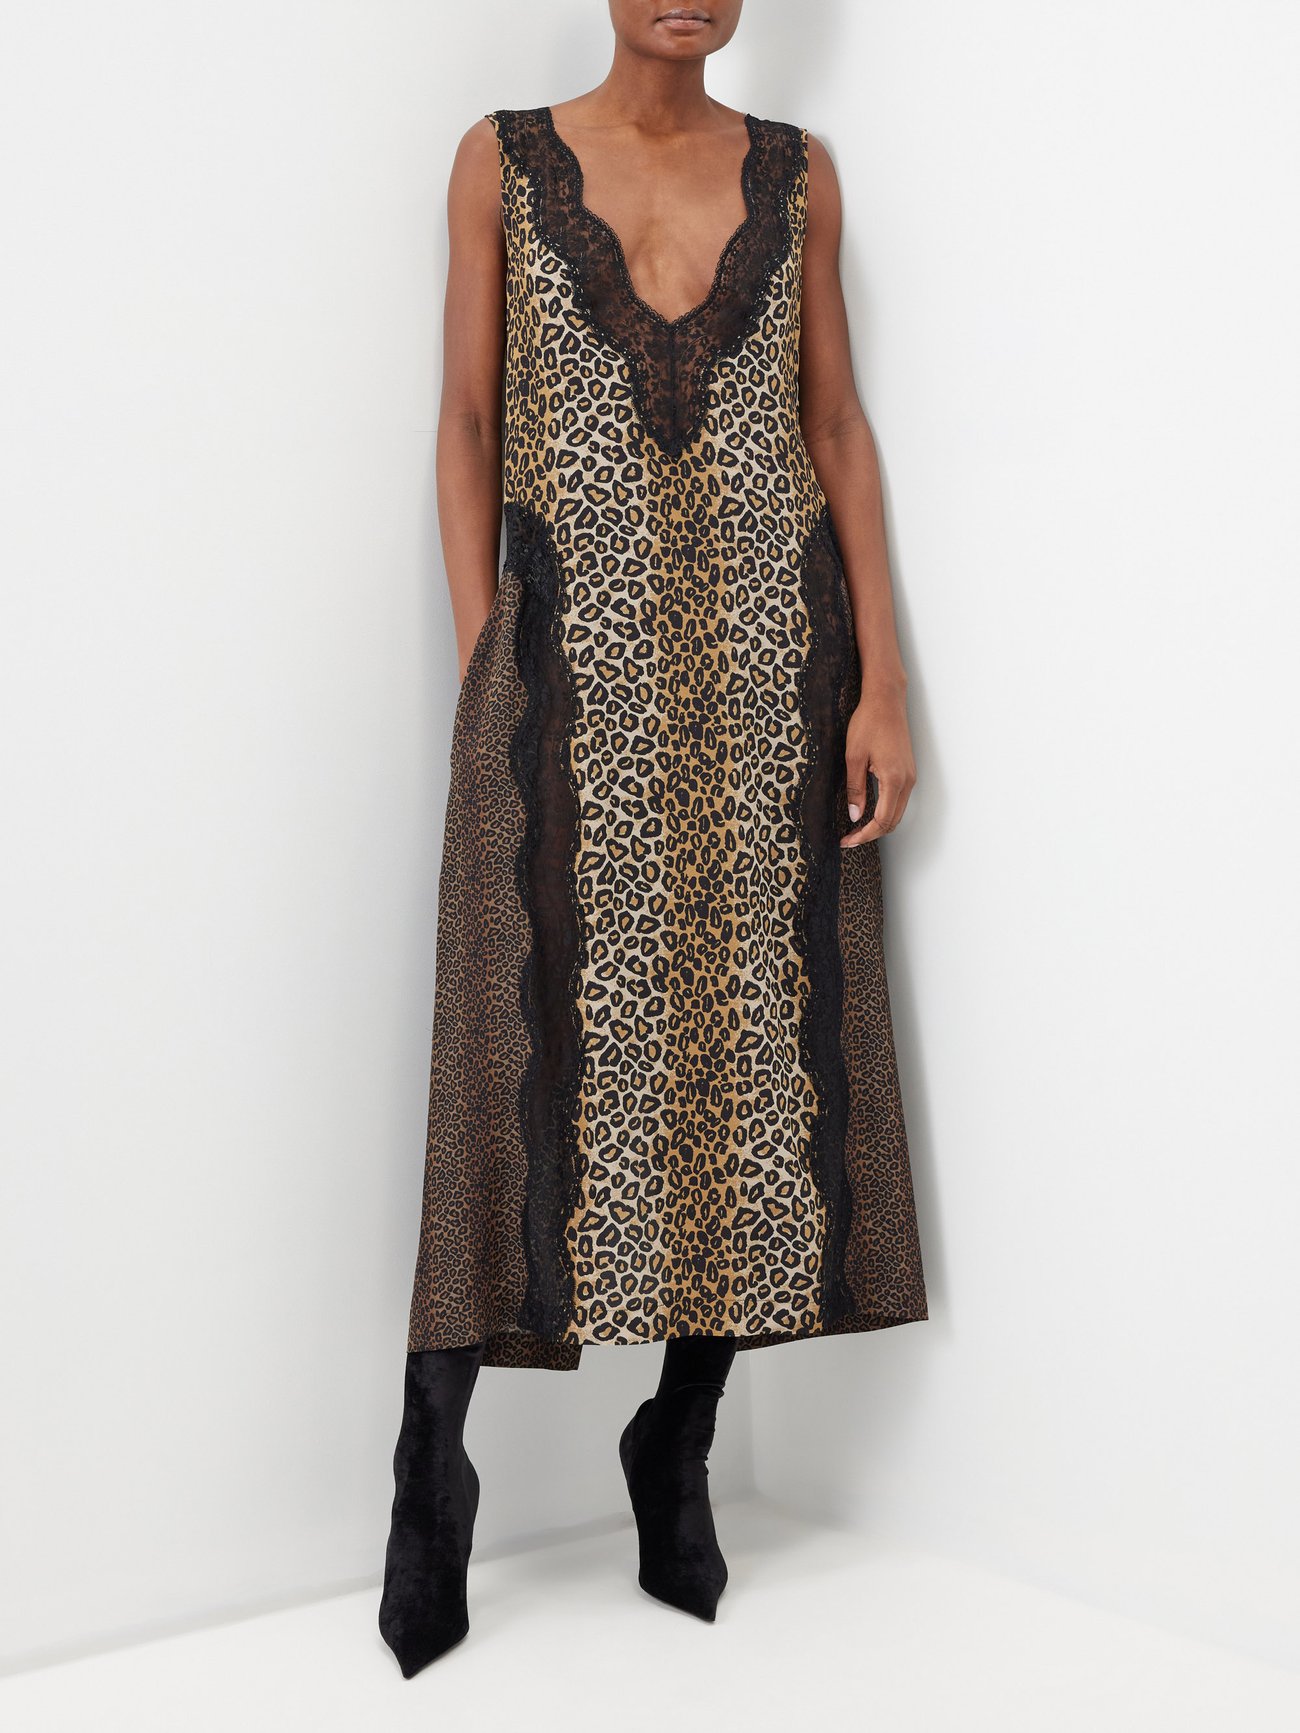 Brown Lace and leopard print satin slip dress, Raey